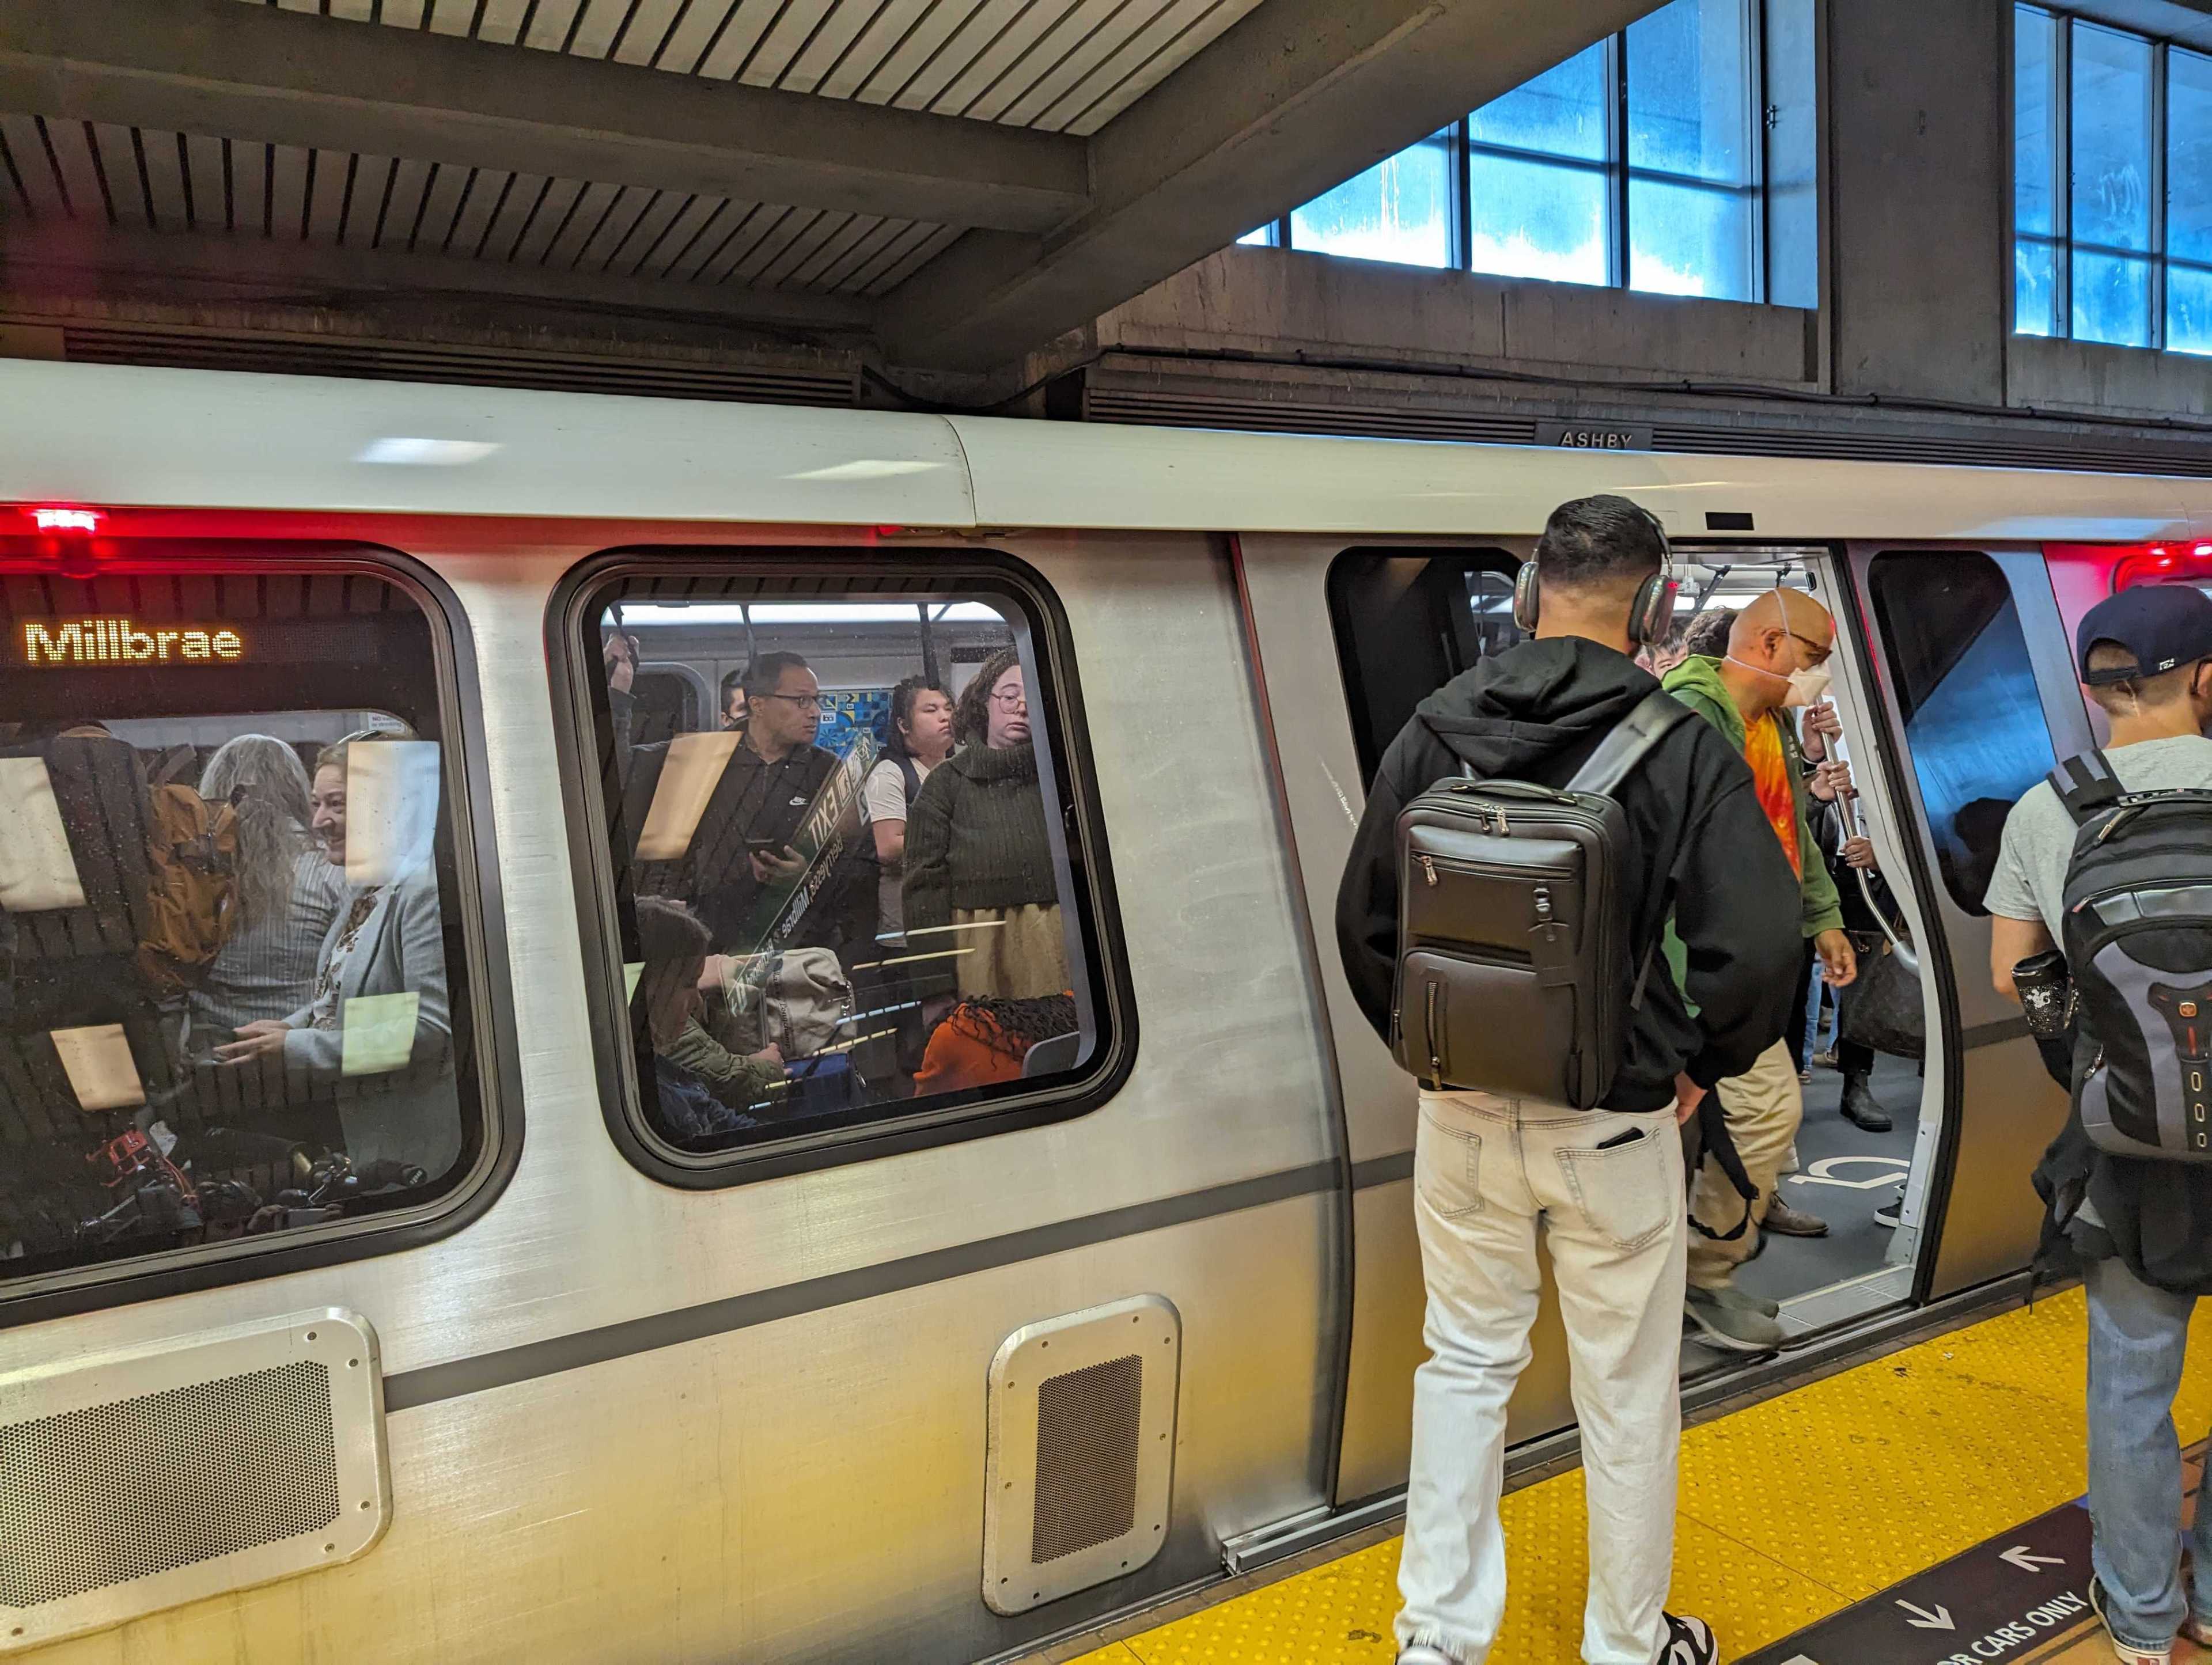 BART Bucks Downtown Decline With Ridership Spikes at Central San Francisco Stations